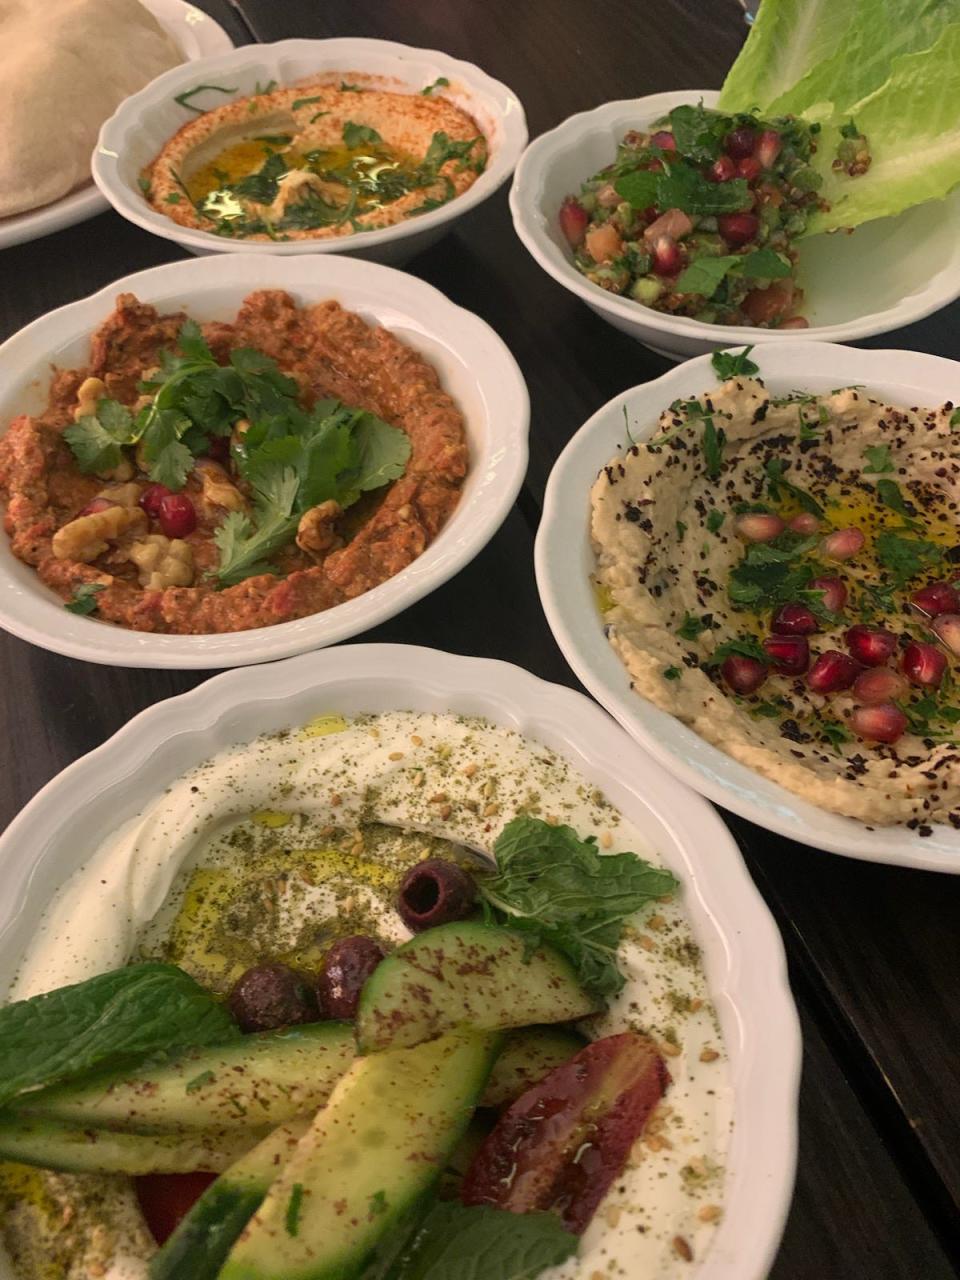 Philadelphia Lebanese restaurant Suraya changed its brunch menu in 2022 to a $37, three-course menu. Many Philly-area restaurants have moved to prix fixe menus as a response to food costs and labor shortages after the pandemic.